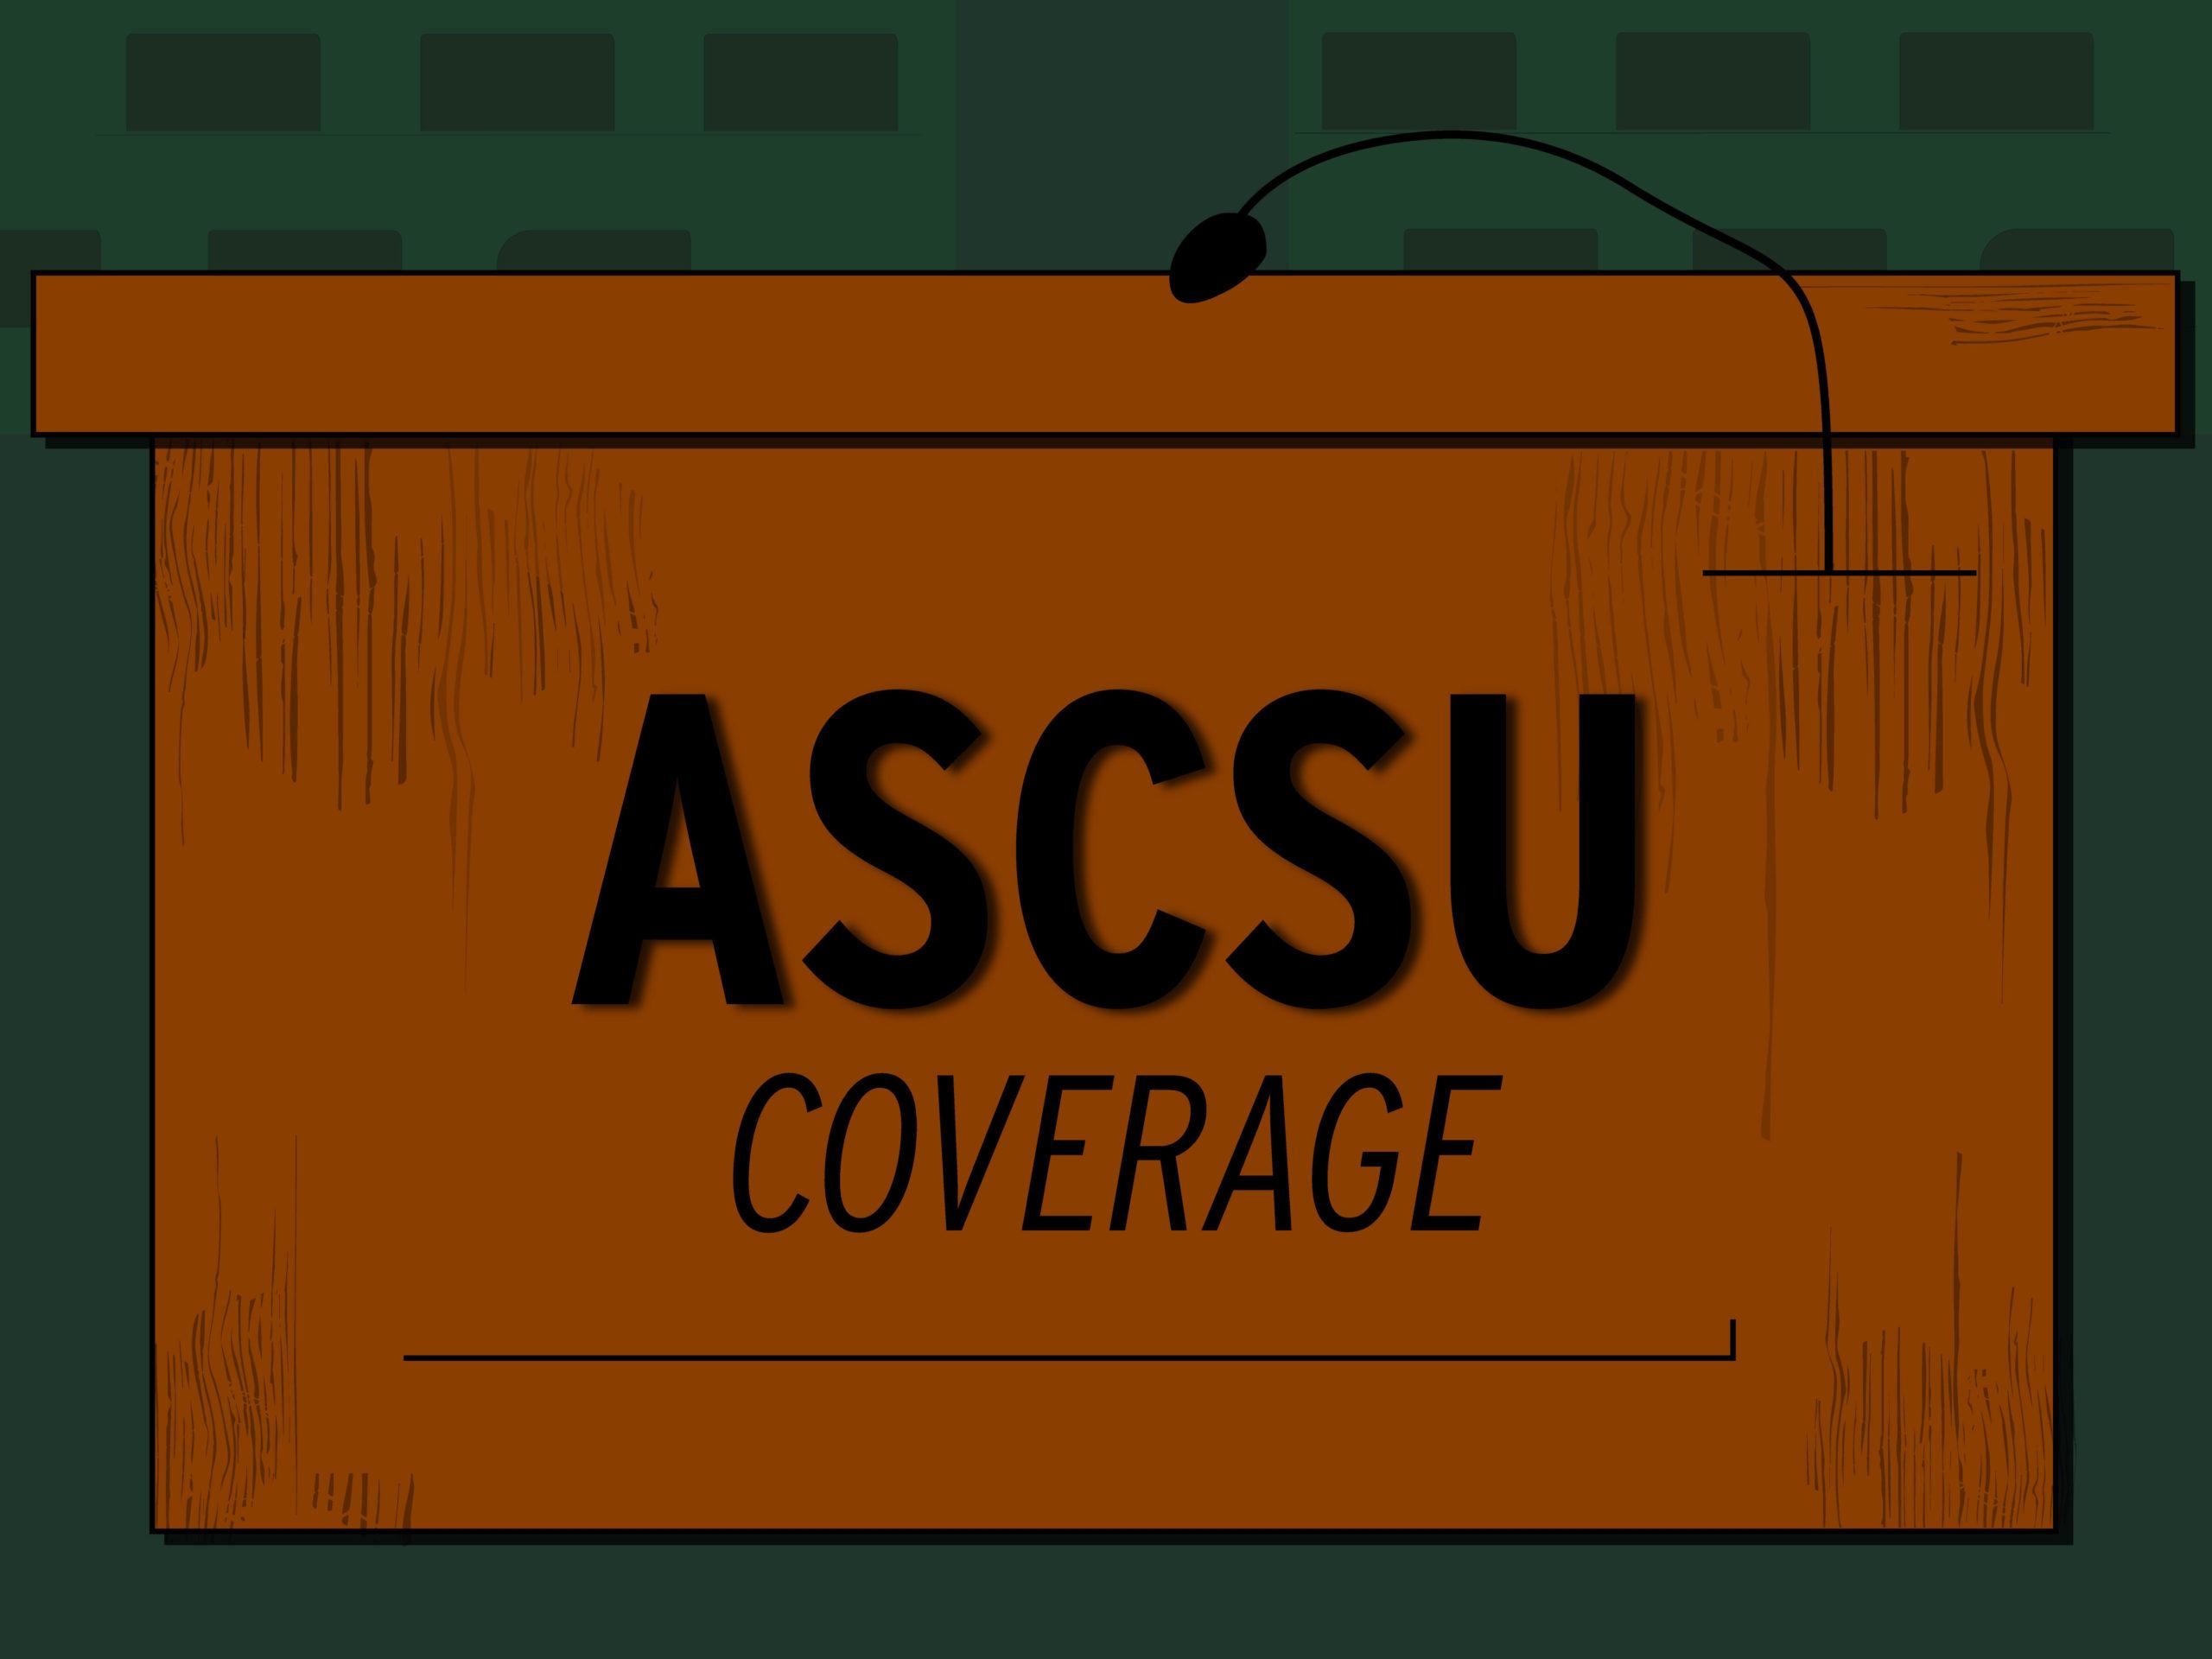 graphic of podium with words "ACSCU coverage" written on it